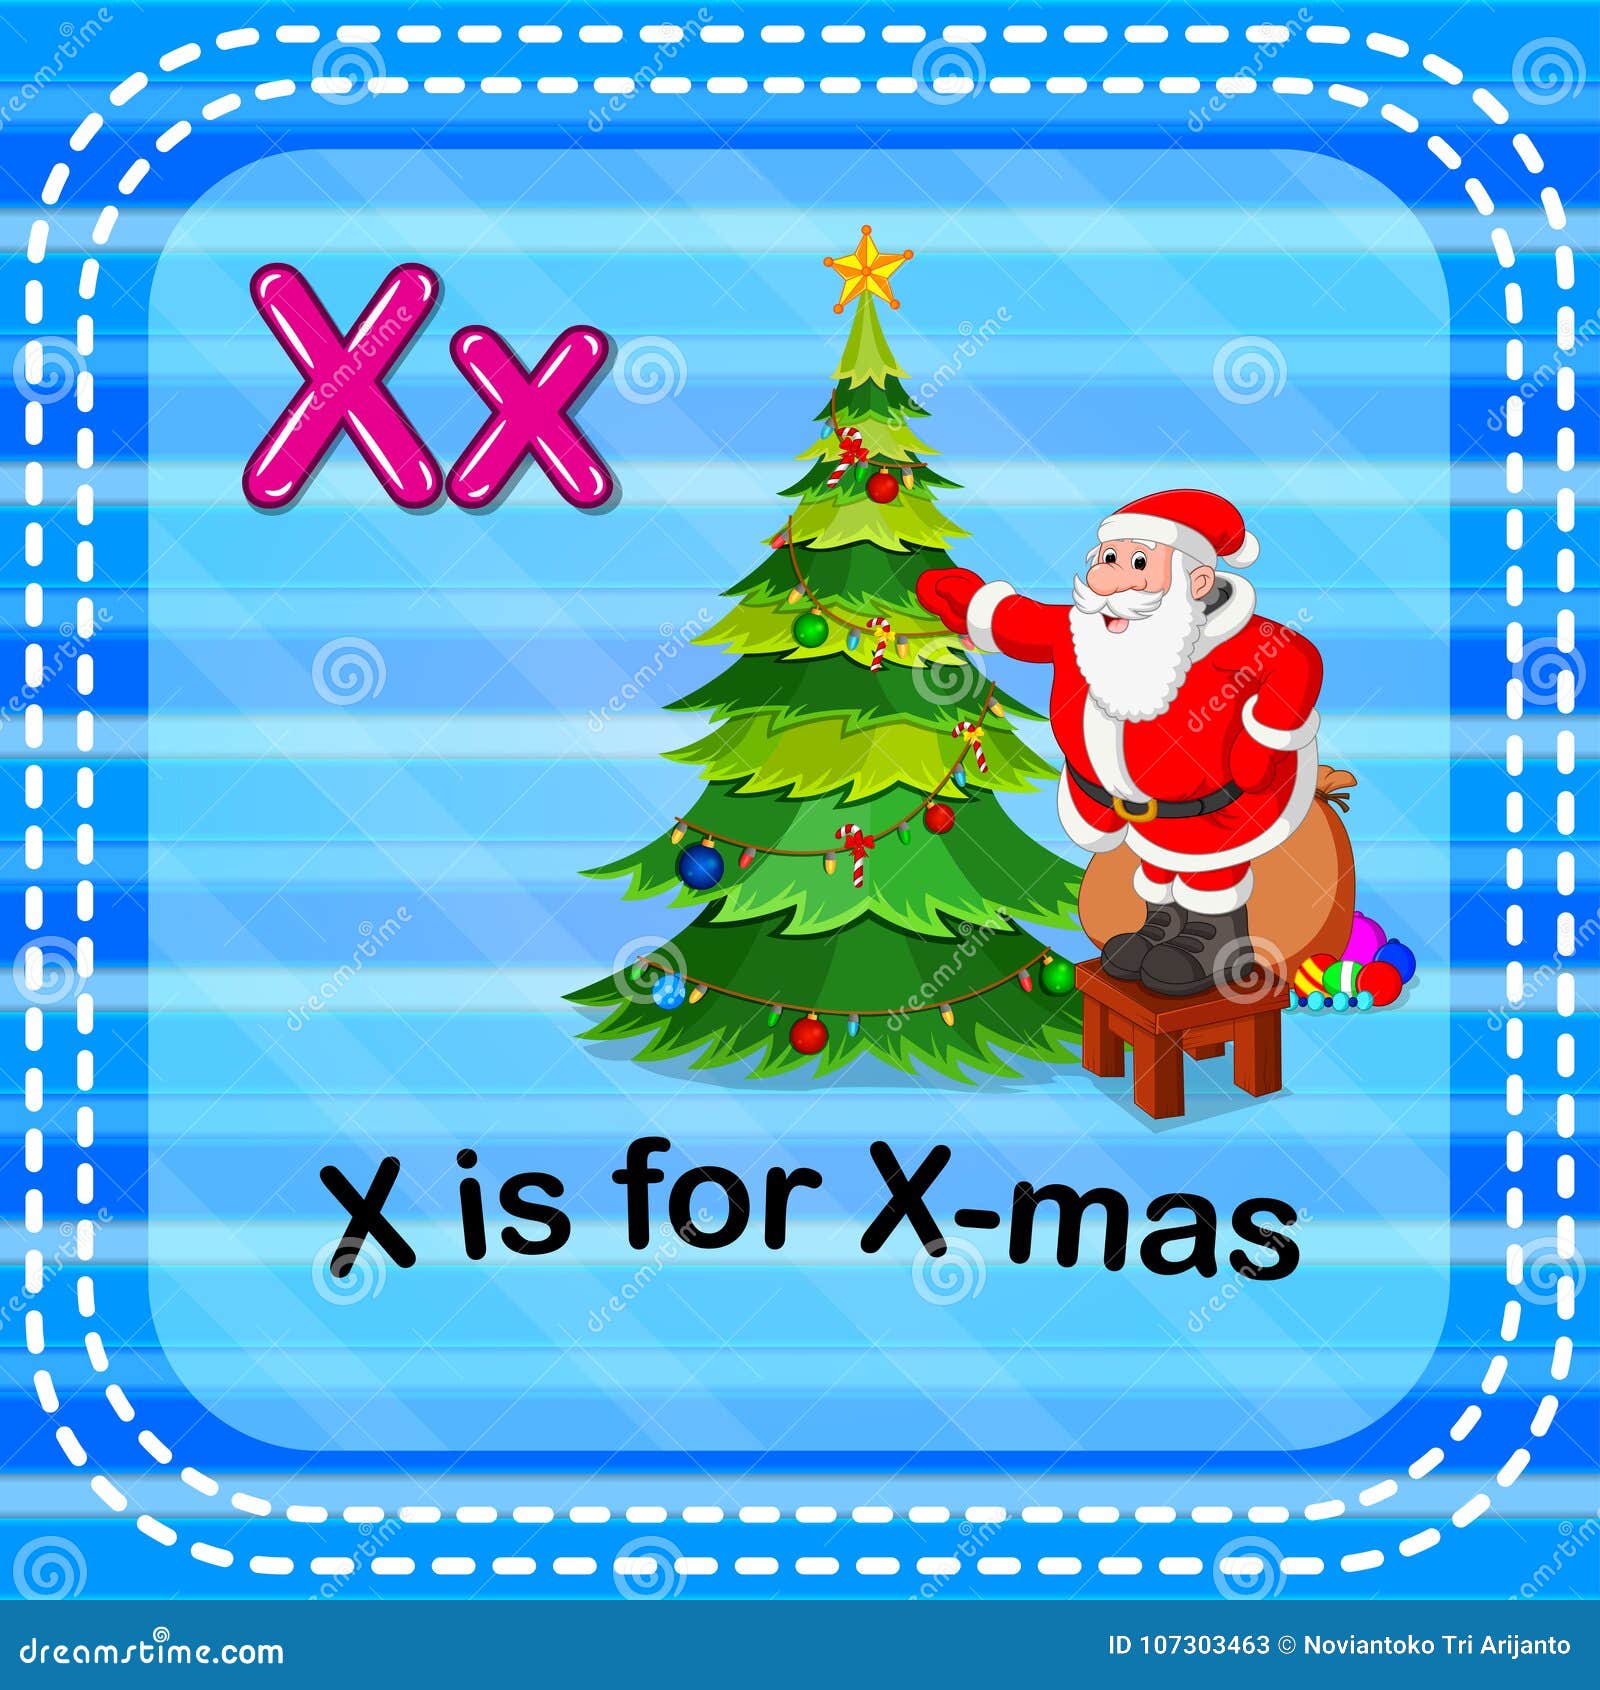 flashcard letter x is for x-mas